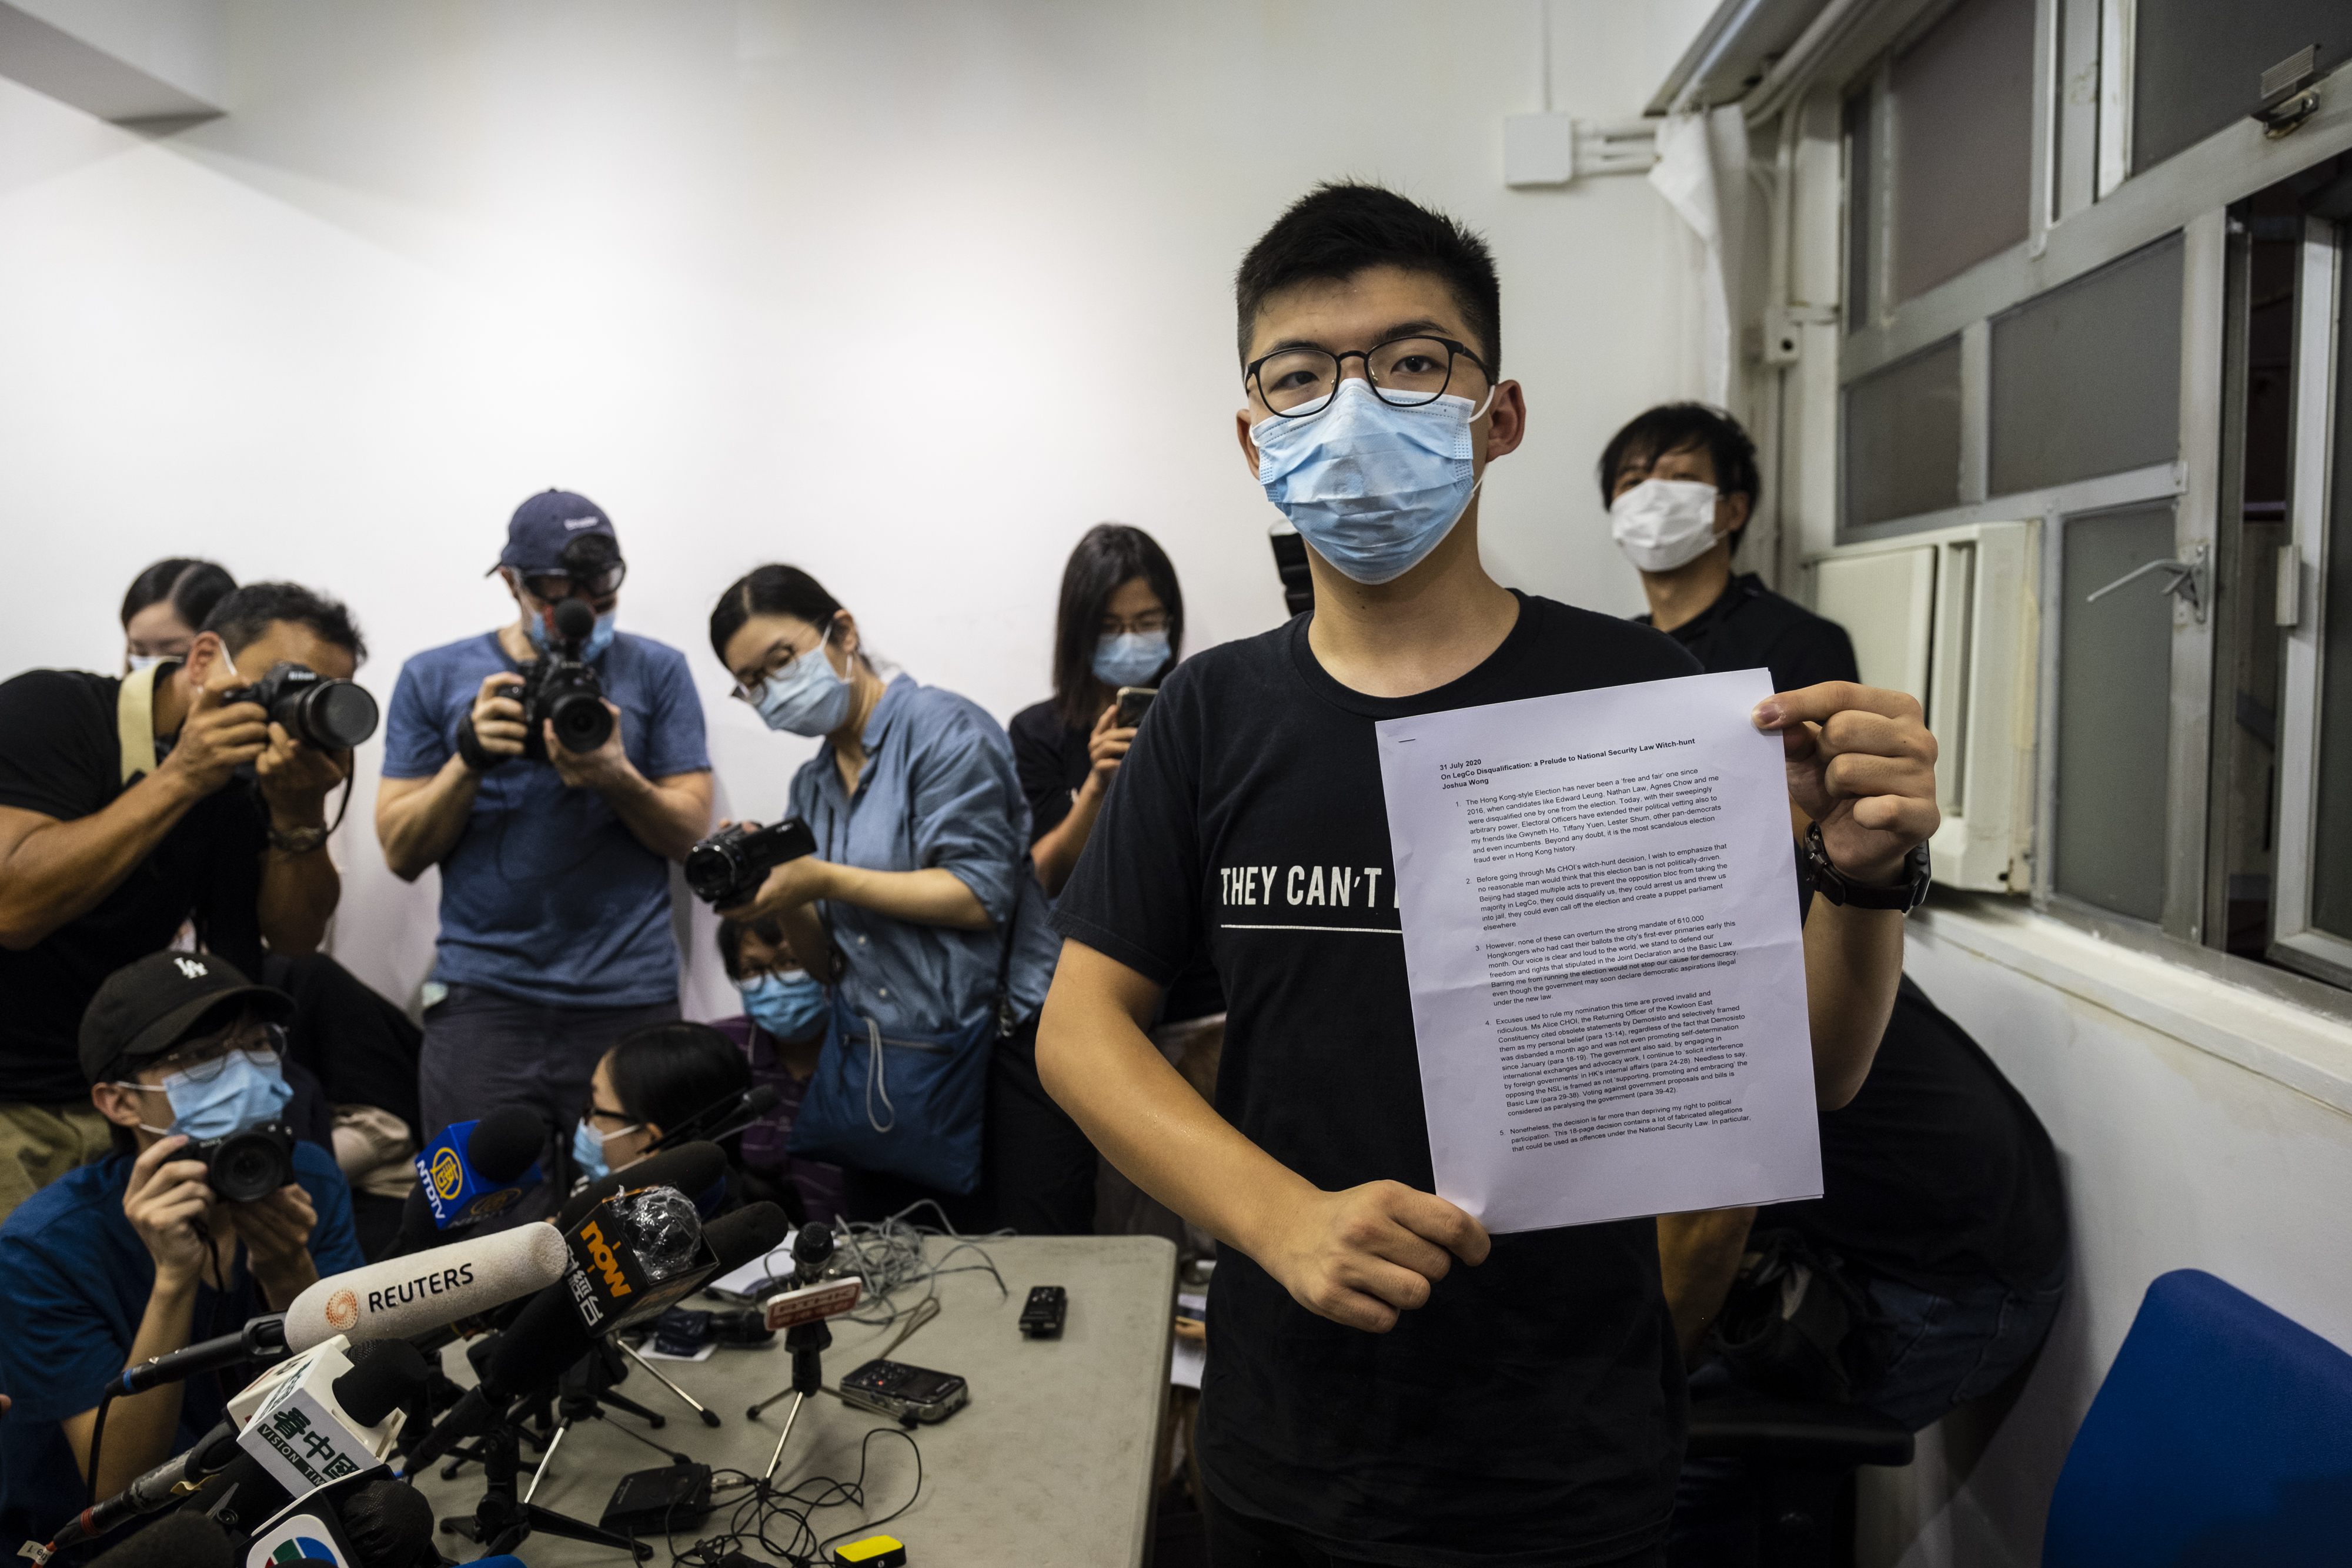 Joshua Wong, pro-democracy activist and disqualified candidate in the upcoming Legislative Council election, poses for a photograph with a copy of his prepared speech during a news conference in Hong Kong, China, on Friday, July 31, 2020. (Chan Long Hei/Bloomberg via Getty Images)